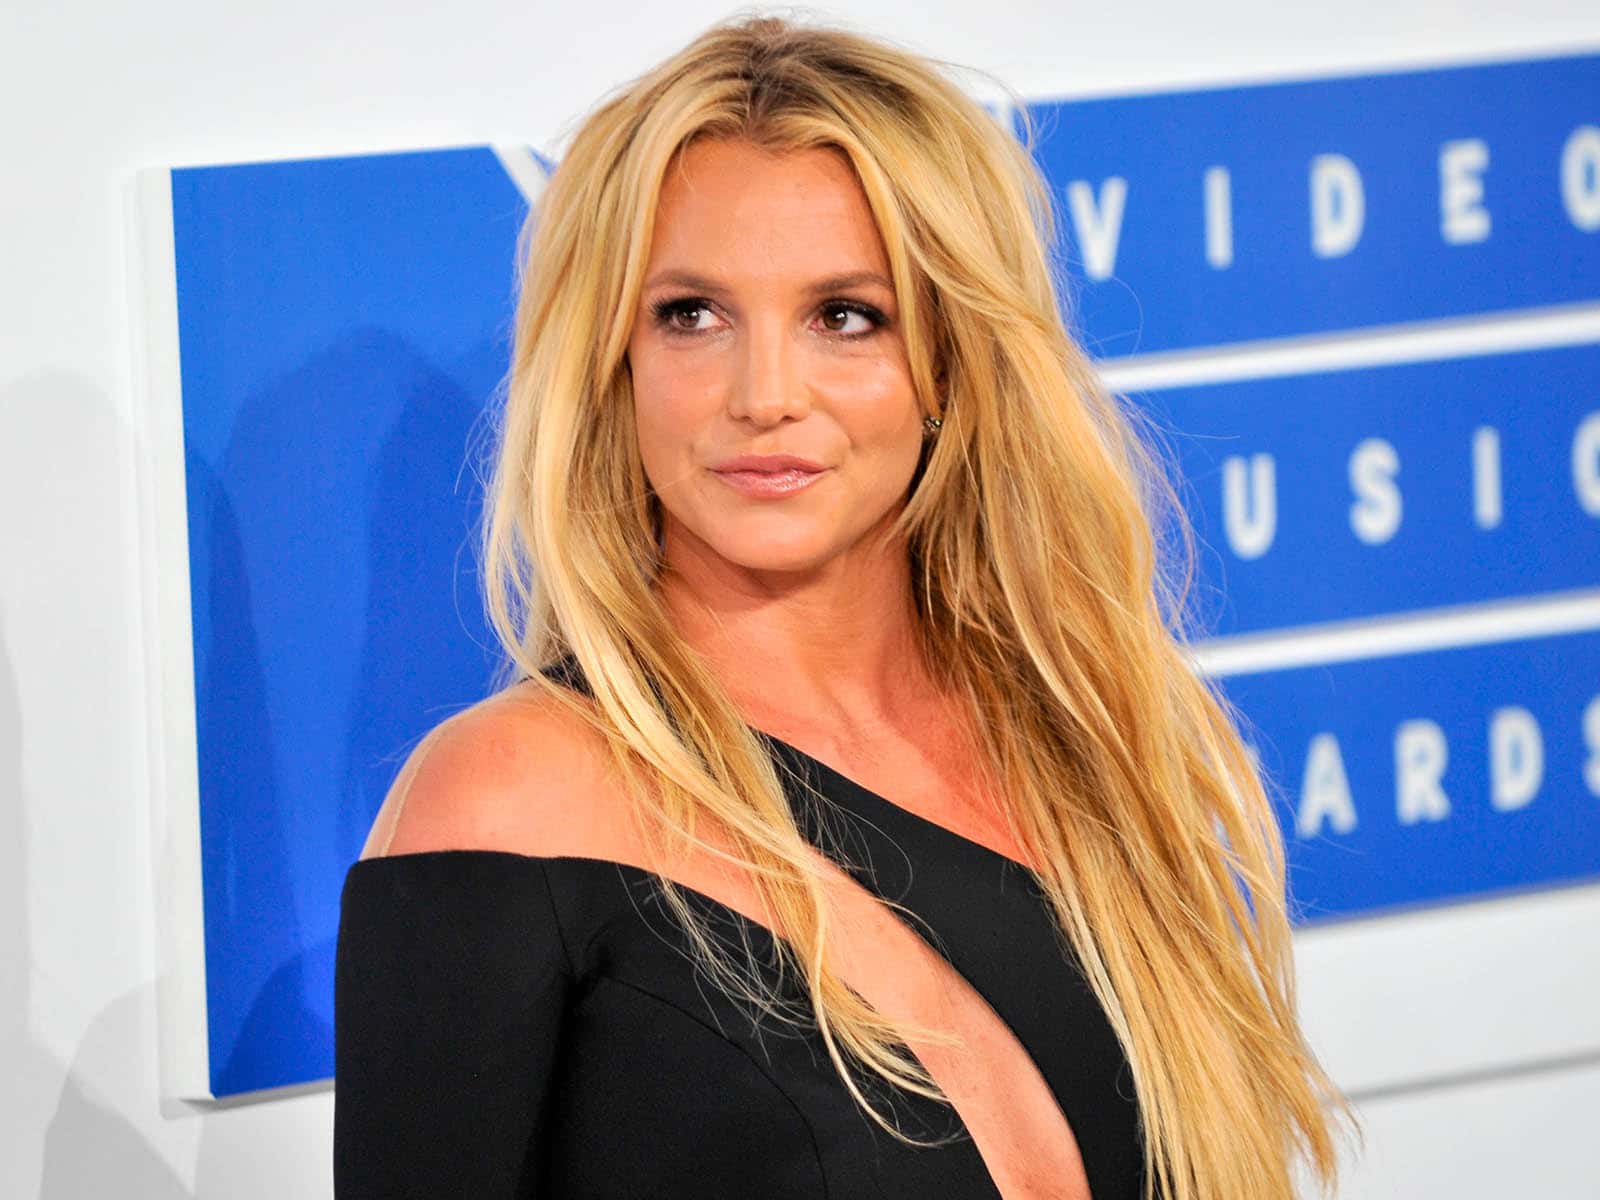 Britney Spears is ready to spill the beans